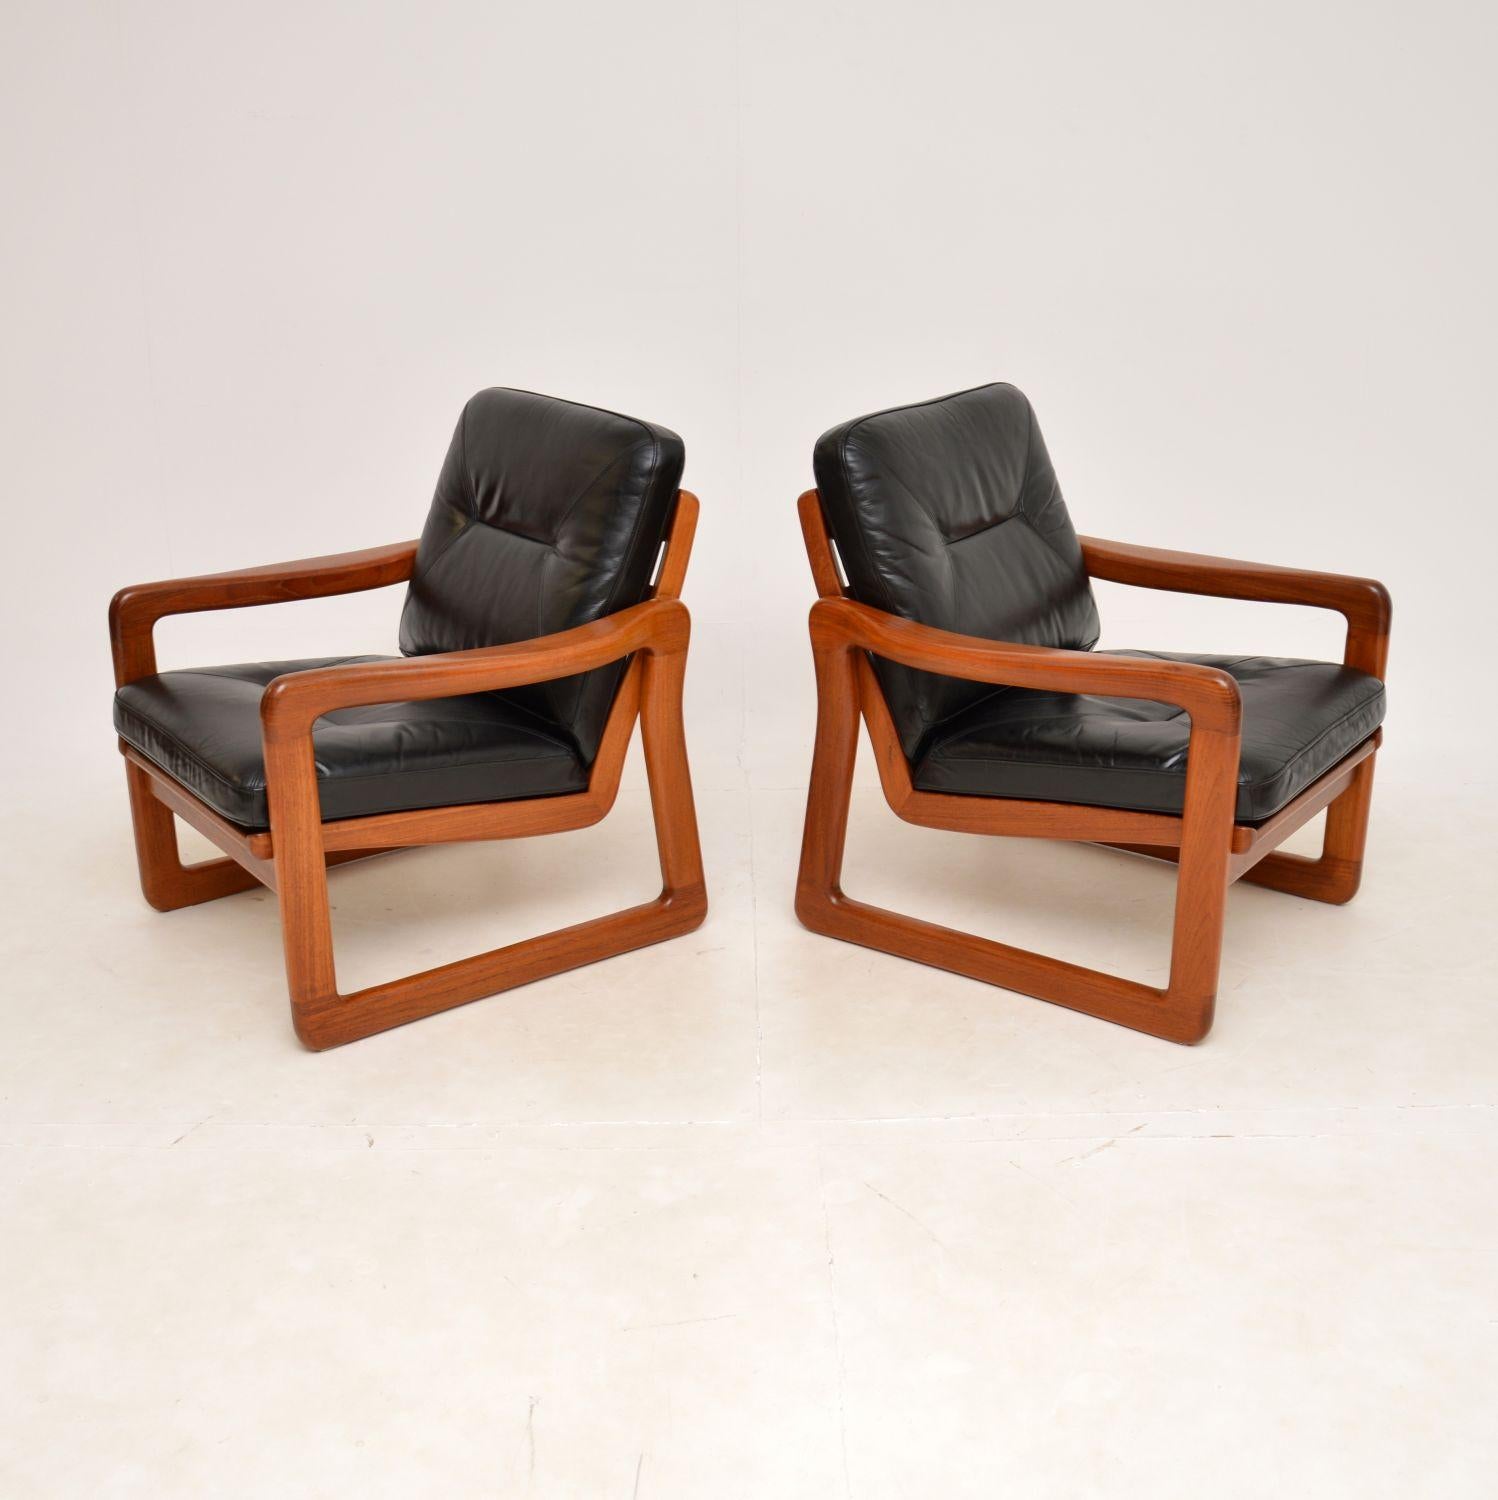 A very stylish and extremely comfortable pair of vintage Danish armchairs in teak and leather. They were recently imported from Denmark, they date from around the 1970s.

The quality is outstanding, the solid teak frames are very sturdy, with